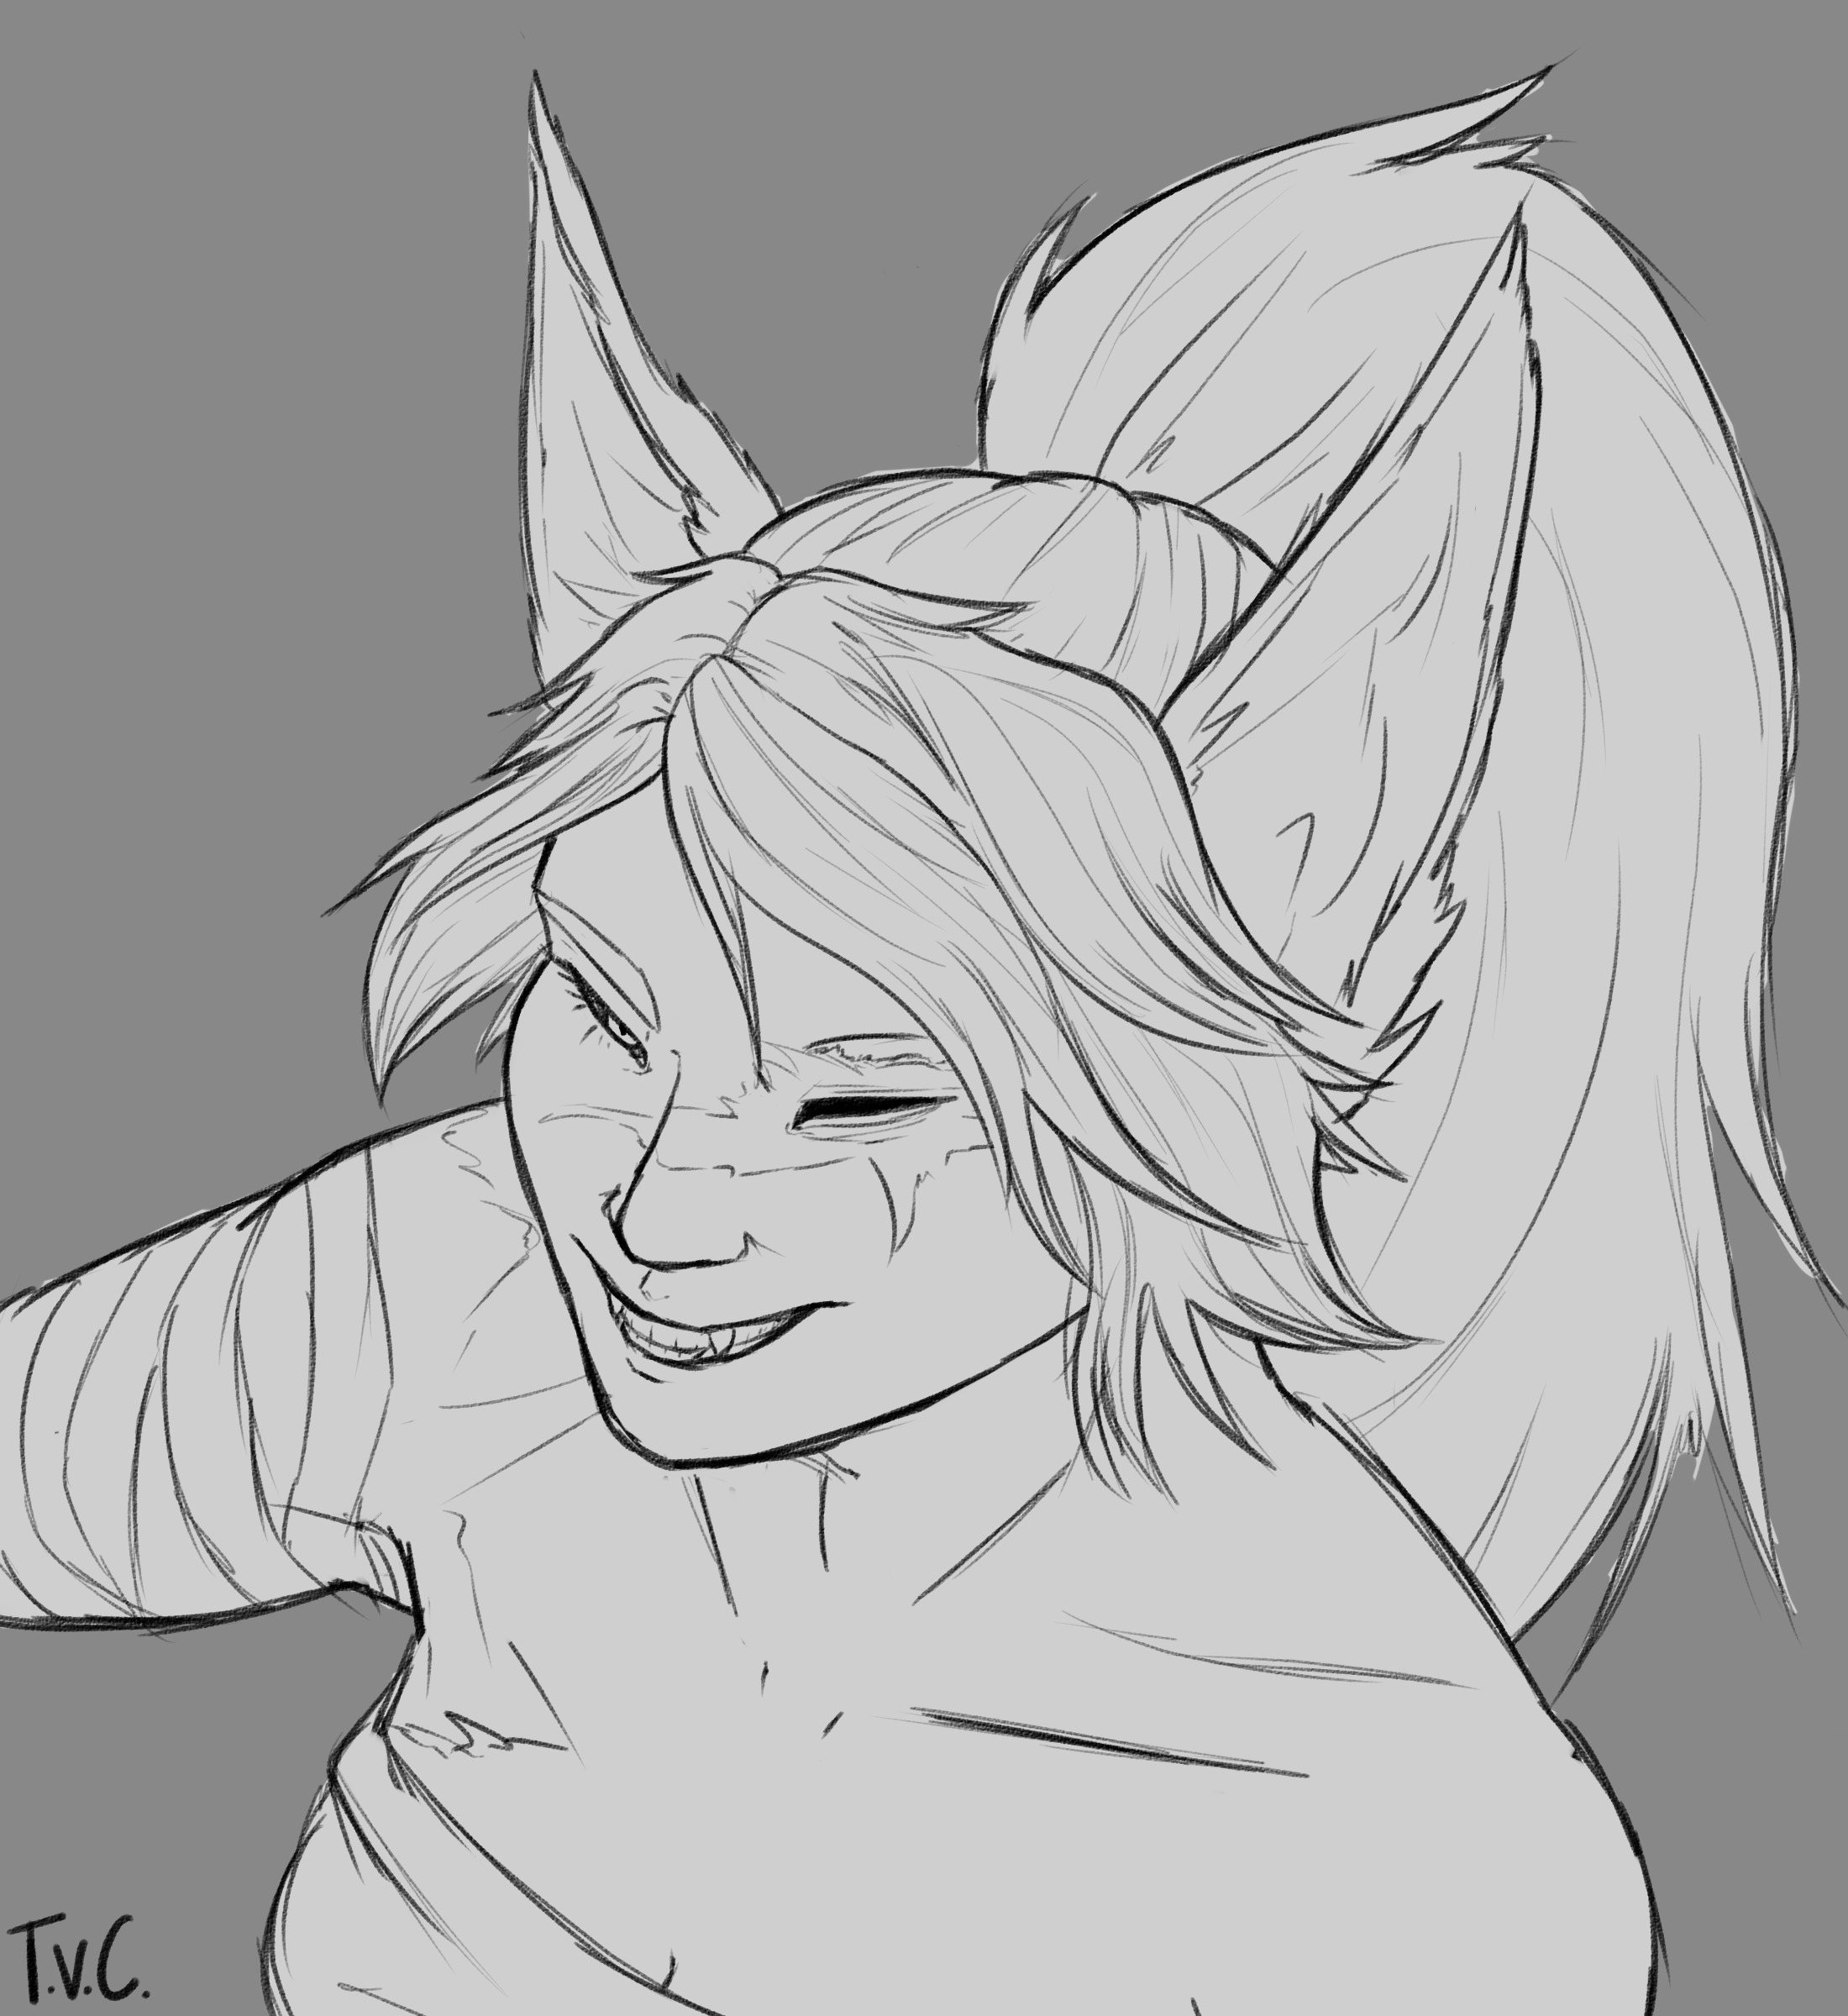 A monochrome sketch of Vixen, a one-armed kitsune, from her shoulders up. She has bandages wrapped around her arm stump and a burn scar across her left eye, which is missing. She has two large fox ears and her hair is in a ponytail.